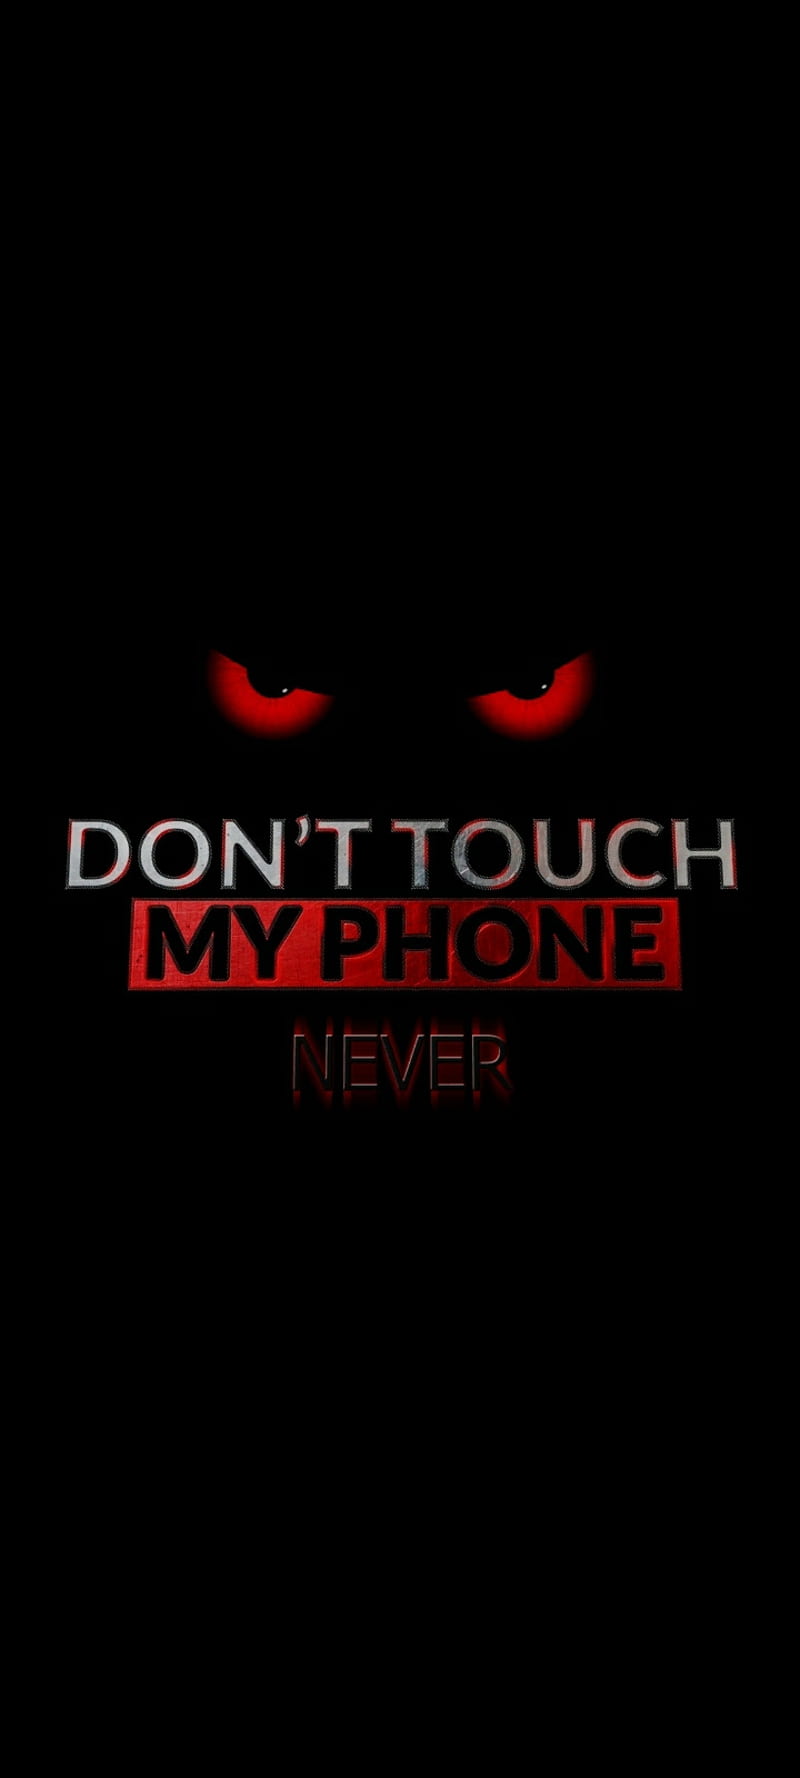 Dont touch my phone, aggressive, red, red eyes, scary, vicious, HD